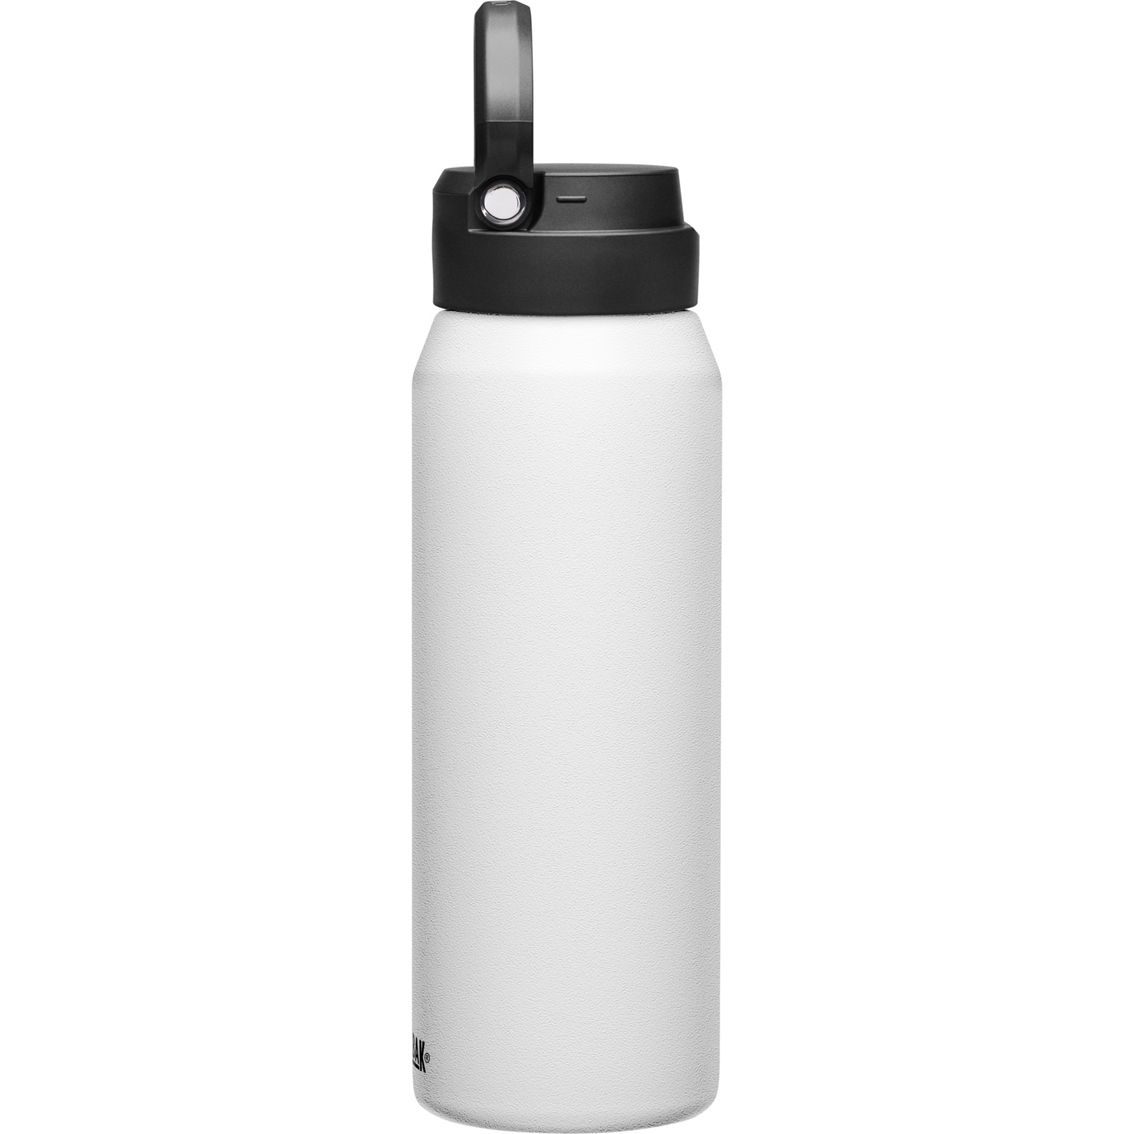 Camelbak Fit Cap Insulated Stainless Steel Water Bottle 32 oz. - Image 4 of 8